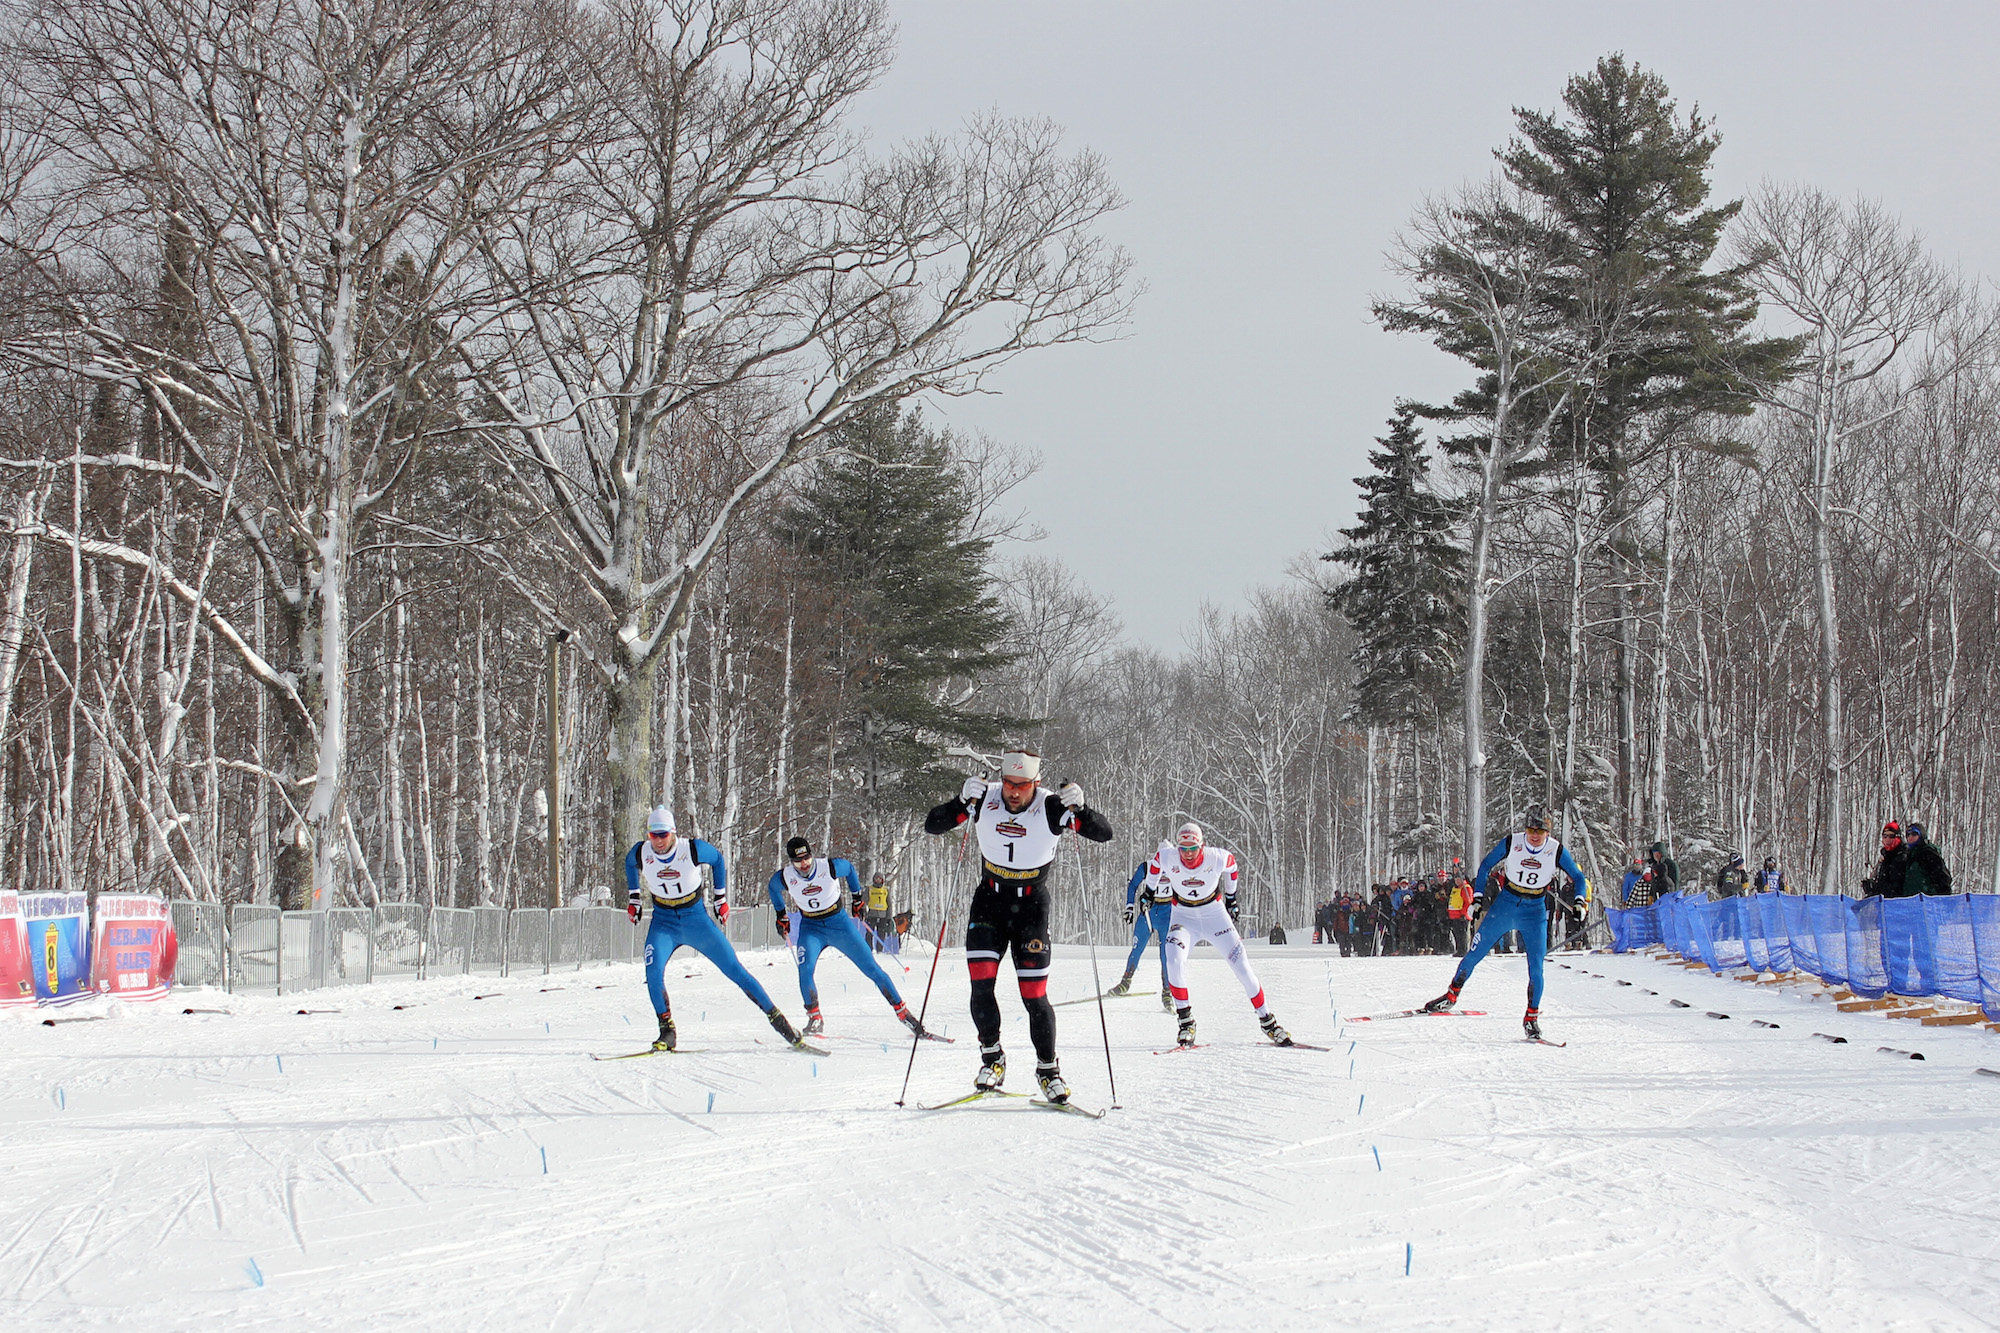 The men's final accelerates toward the finish in the 1.5 k freestyle sprint at the 2015 U.S. Cross Country Championships in Houghton, Mich.